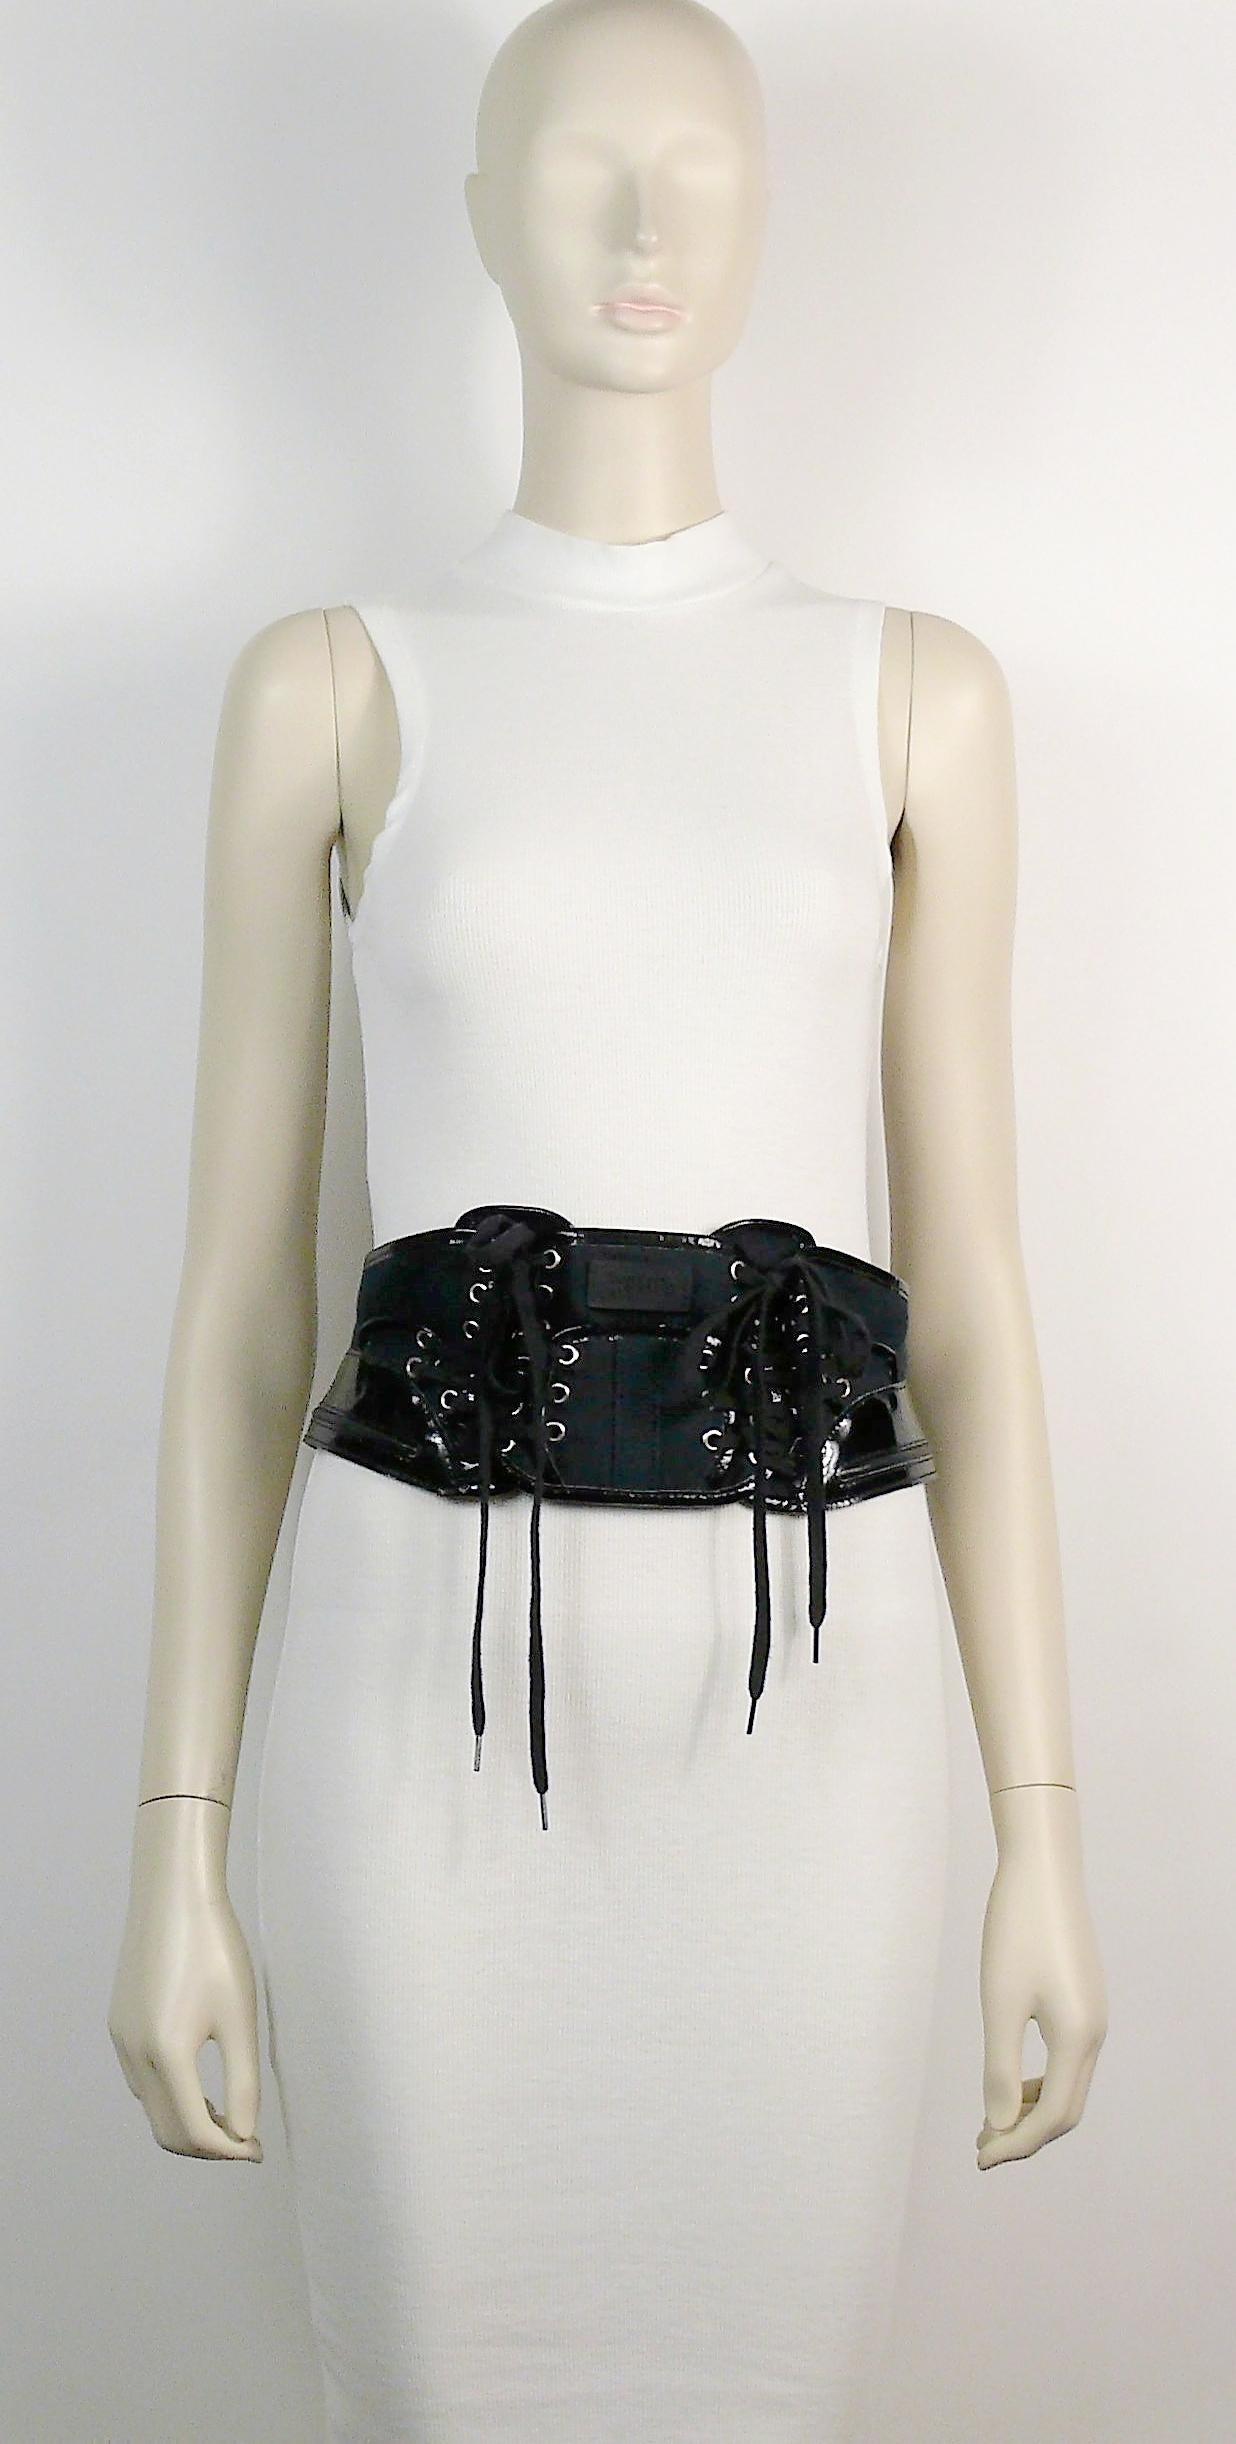 JEAN PAUL GAULTIER collector boxing corset belt.

This belt features :
- Dark navy blue canvas panels embellished with black patent PVC details.
- Black laces on front.
- Silver toned eyelets.
- Rubber JEAN PAUL GAULTIER patch on the frontal